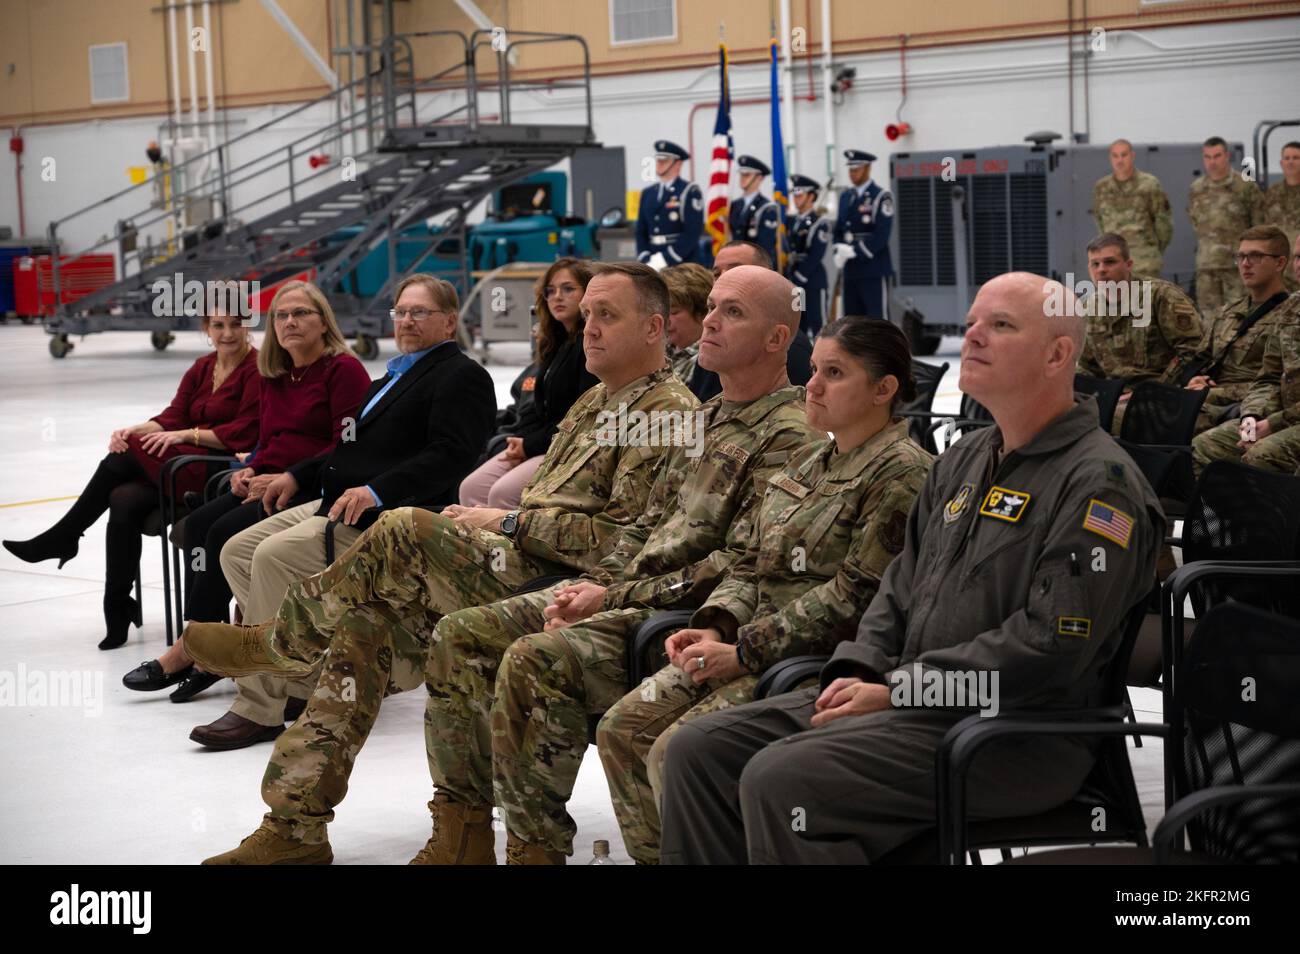 Col. Bryan M. Bailey, 911th Airlift Wing commander, Lt. Col. Kathleen LeBahn, 911th Mission Support Group commander, Lt. Col. Jamie Akers, 911th Operations Group commander, and Chief Master Sgt. Dennis Jendrzejewski, 911th Airlift Wing command chief, attend a promotion ceremony for Chief Master Sgt. Thomas Mikan, 911th Maintenance Group quality assurance superintendent, at the Pittsburgh International Airport Air Reserve Station, Pennsylvania, Oct. 2, 2022. Chief induction ceremonies are rare as only one percent of the enlisted force may achieve the rank of chief master sergeant. Stock Photo